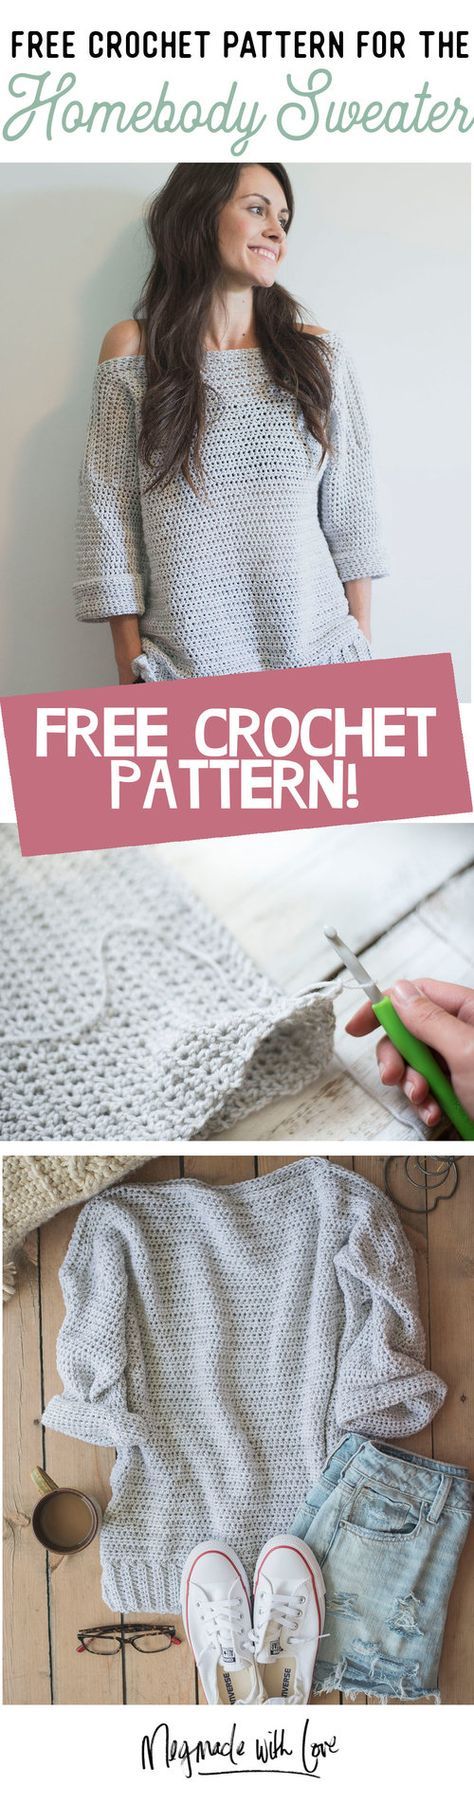 Free-Crochet-Pattern-for-The-Homebody-Sweater-Easy-Comfy-and.jpg